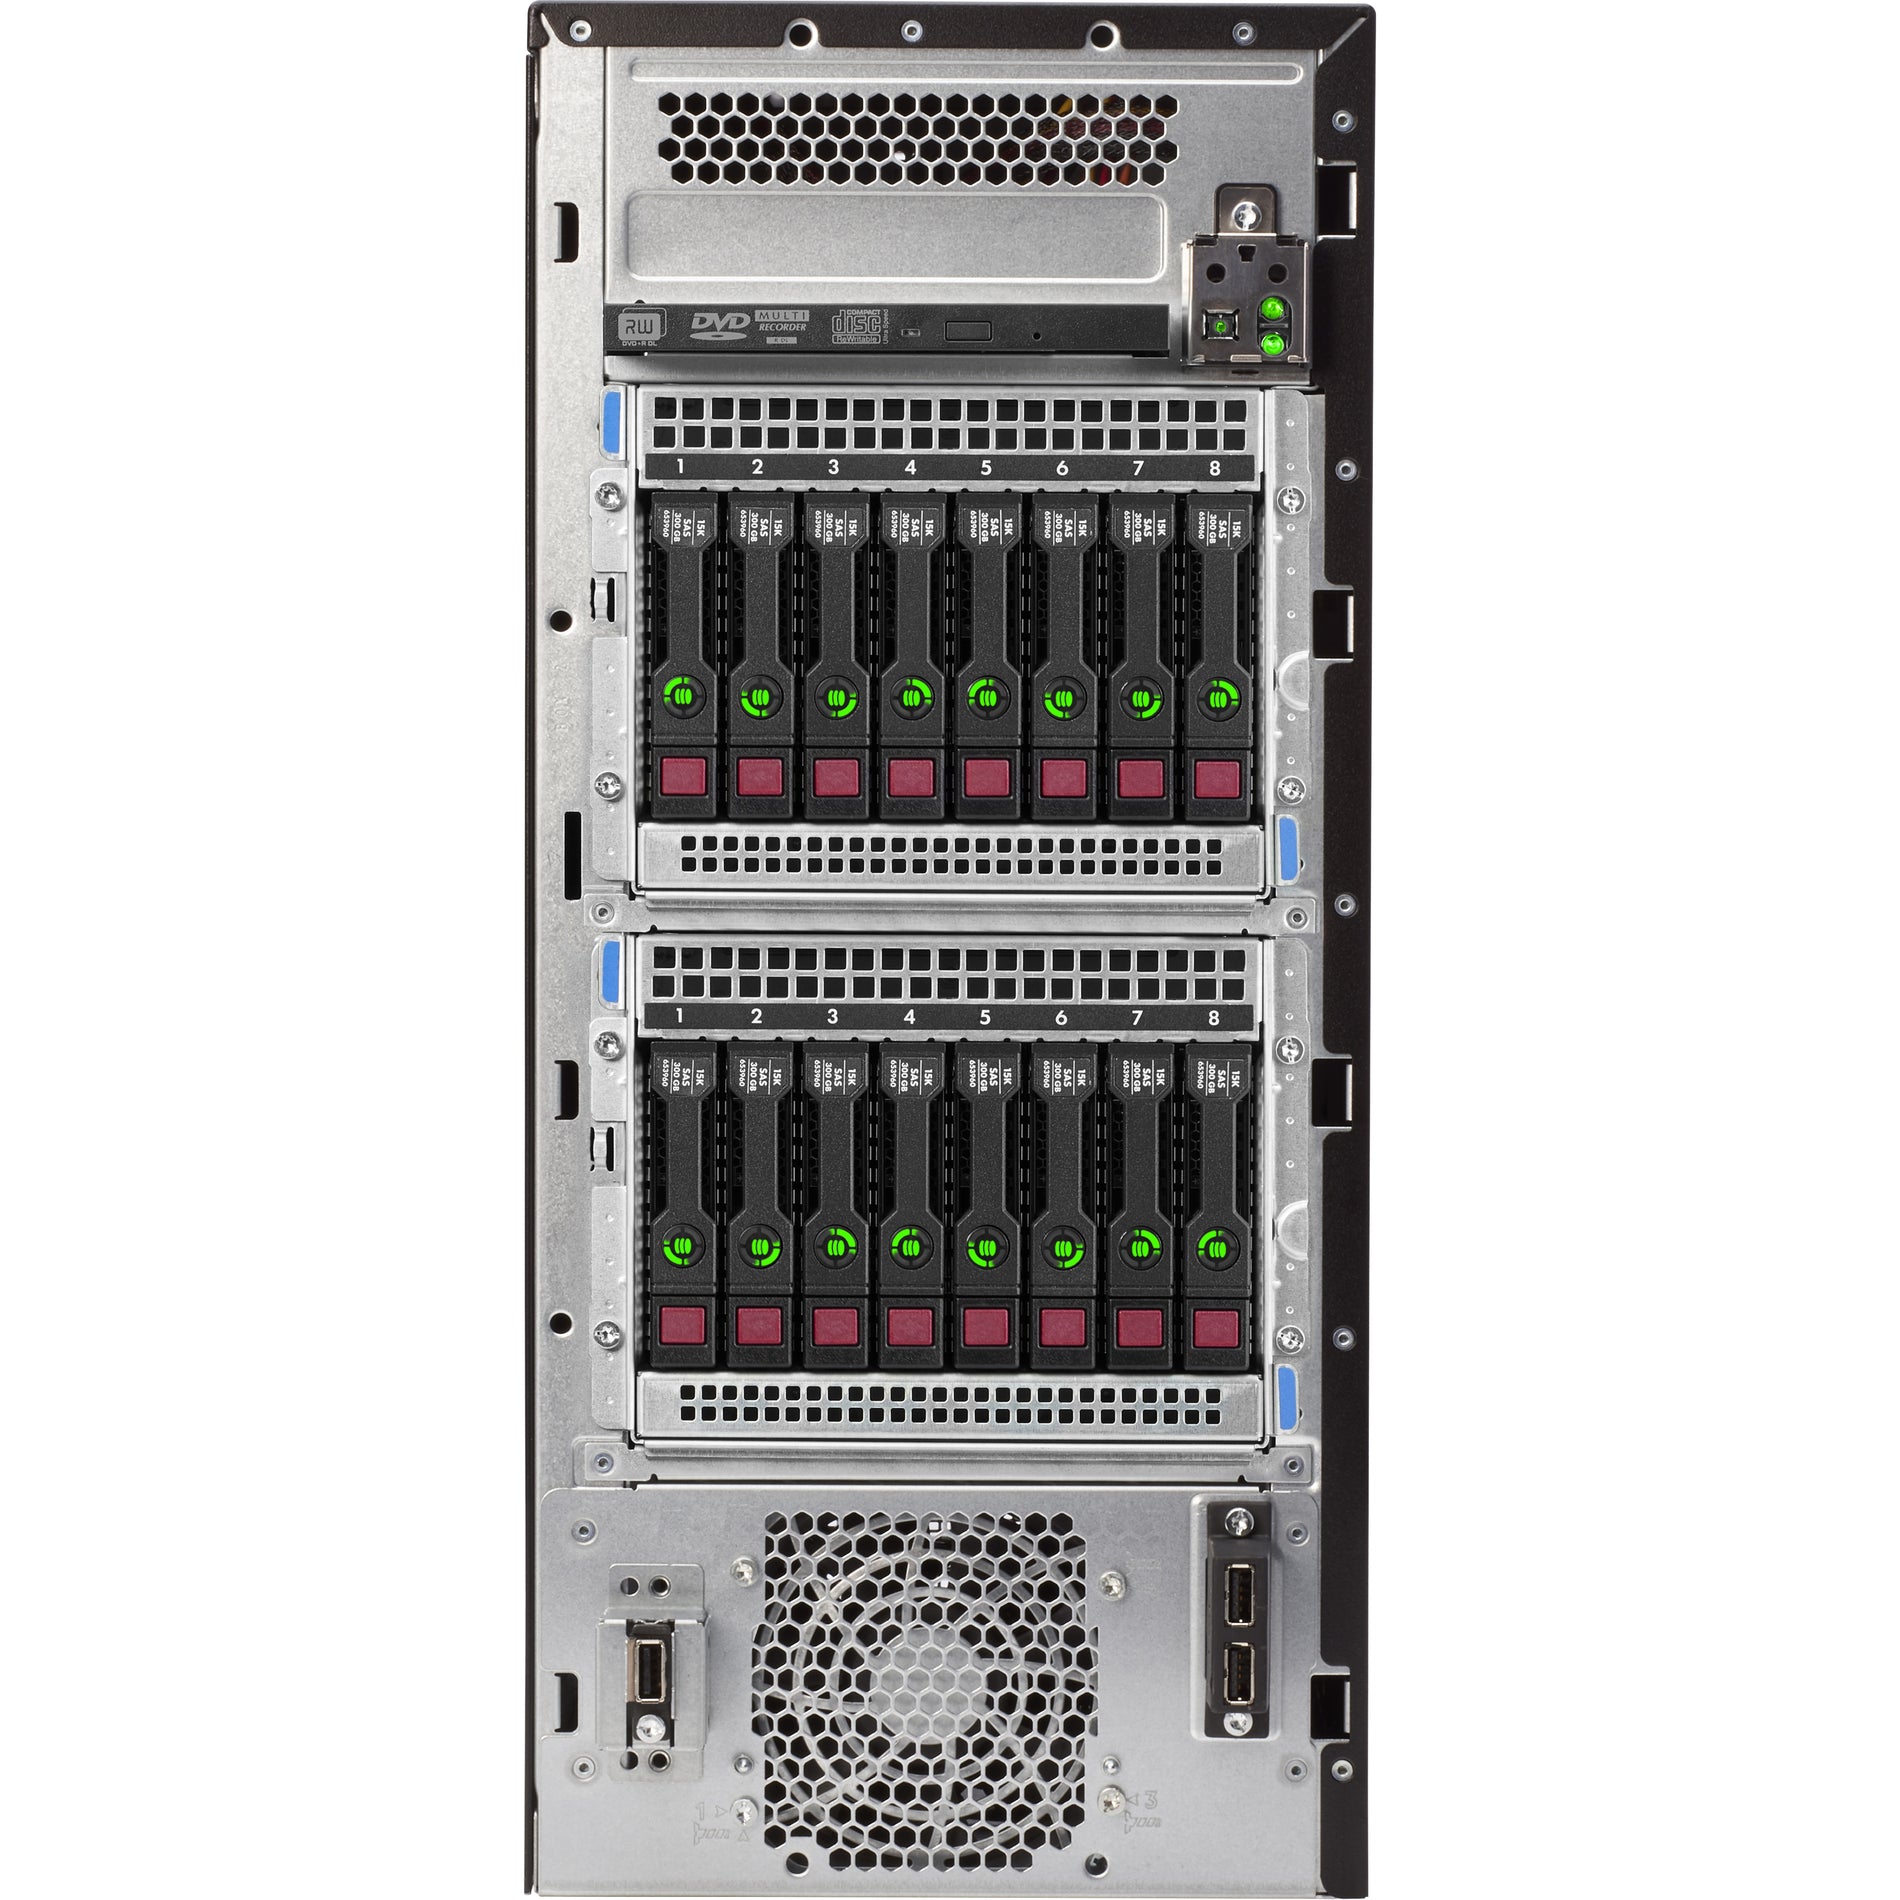 HPE P10812-001 ProLiant ML110 Gen10 4208 2.1GHz 8-core 1P 16GB-R S100i 4LFF 550W PS Server, 16GB DDR4, RAID Supported